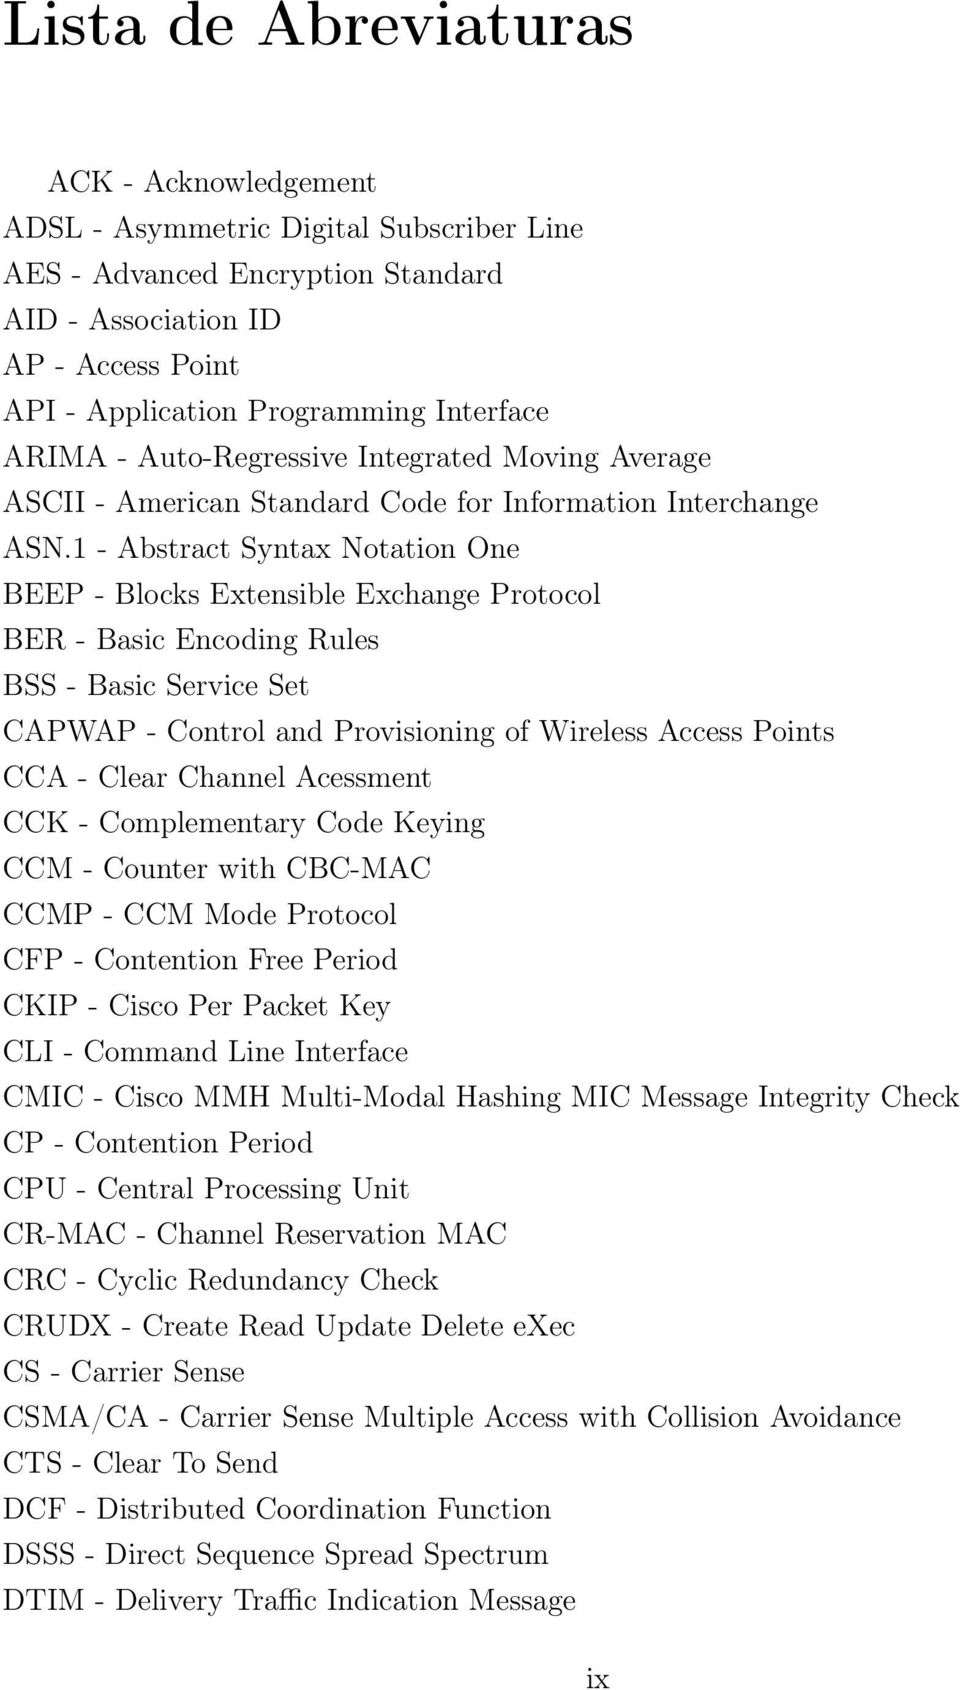 1 - Abstract Syntax Notation One BEEP - Blocks Extensible Exchange Protocol BER - Basic Encoding Rules BSS - Basic Service Set CAPWAP - Control and Provisioning of Wireless Access Points CCA - Clear